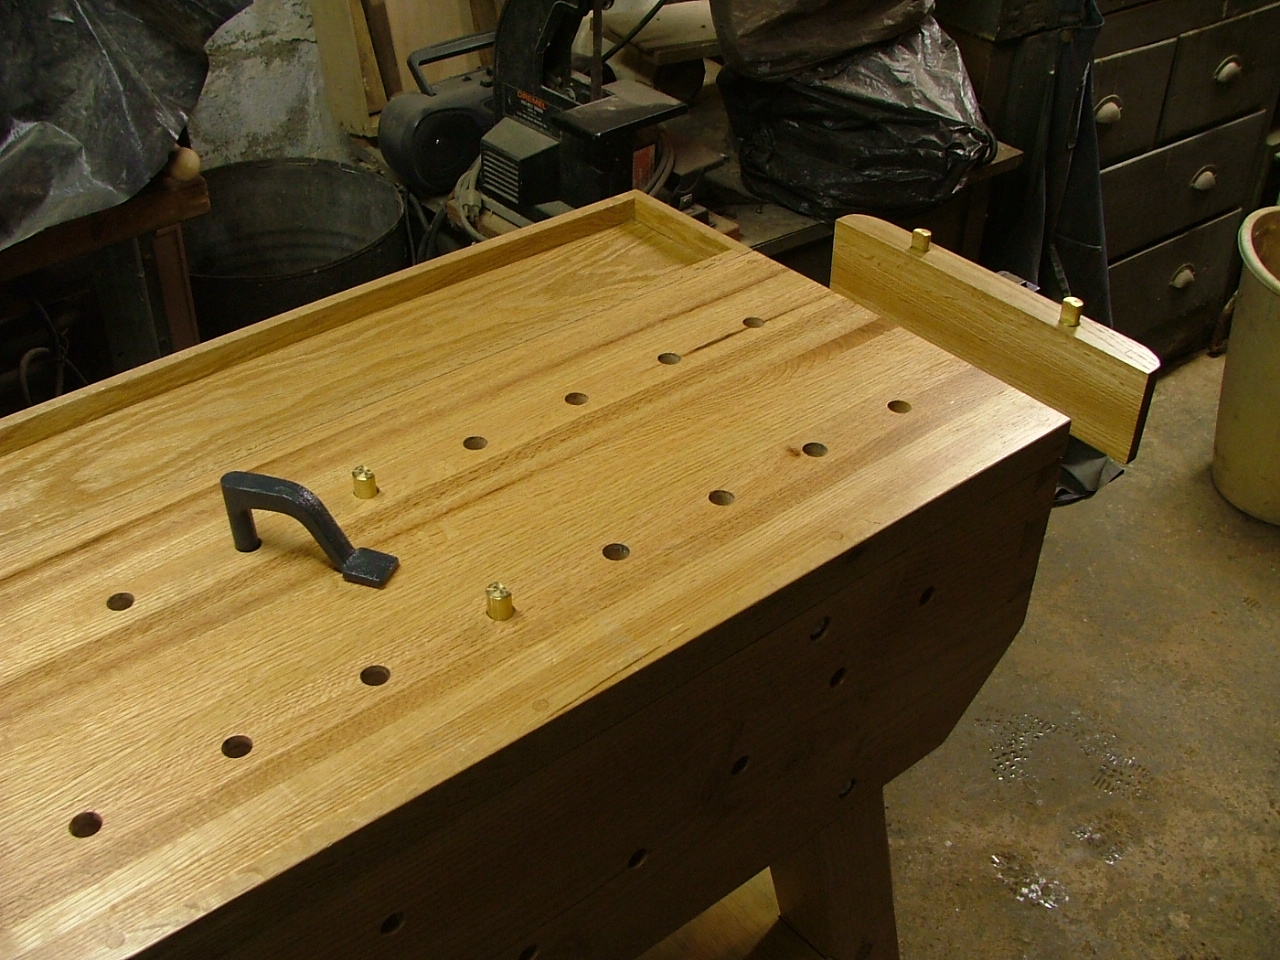 Woodworking table with holes